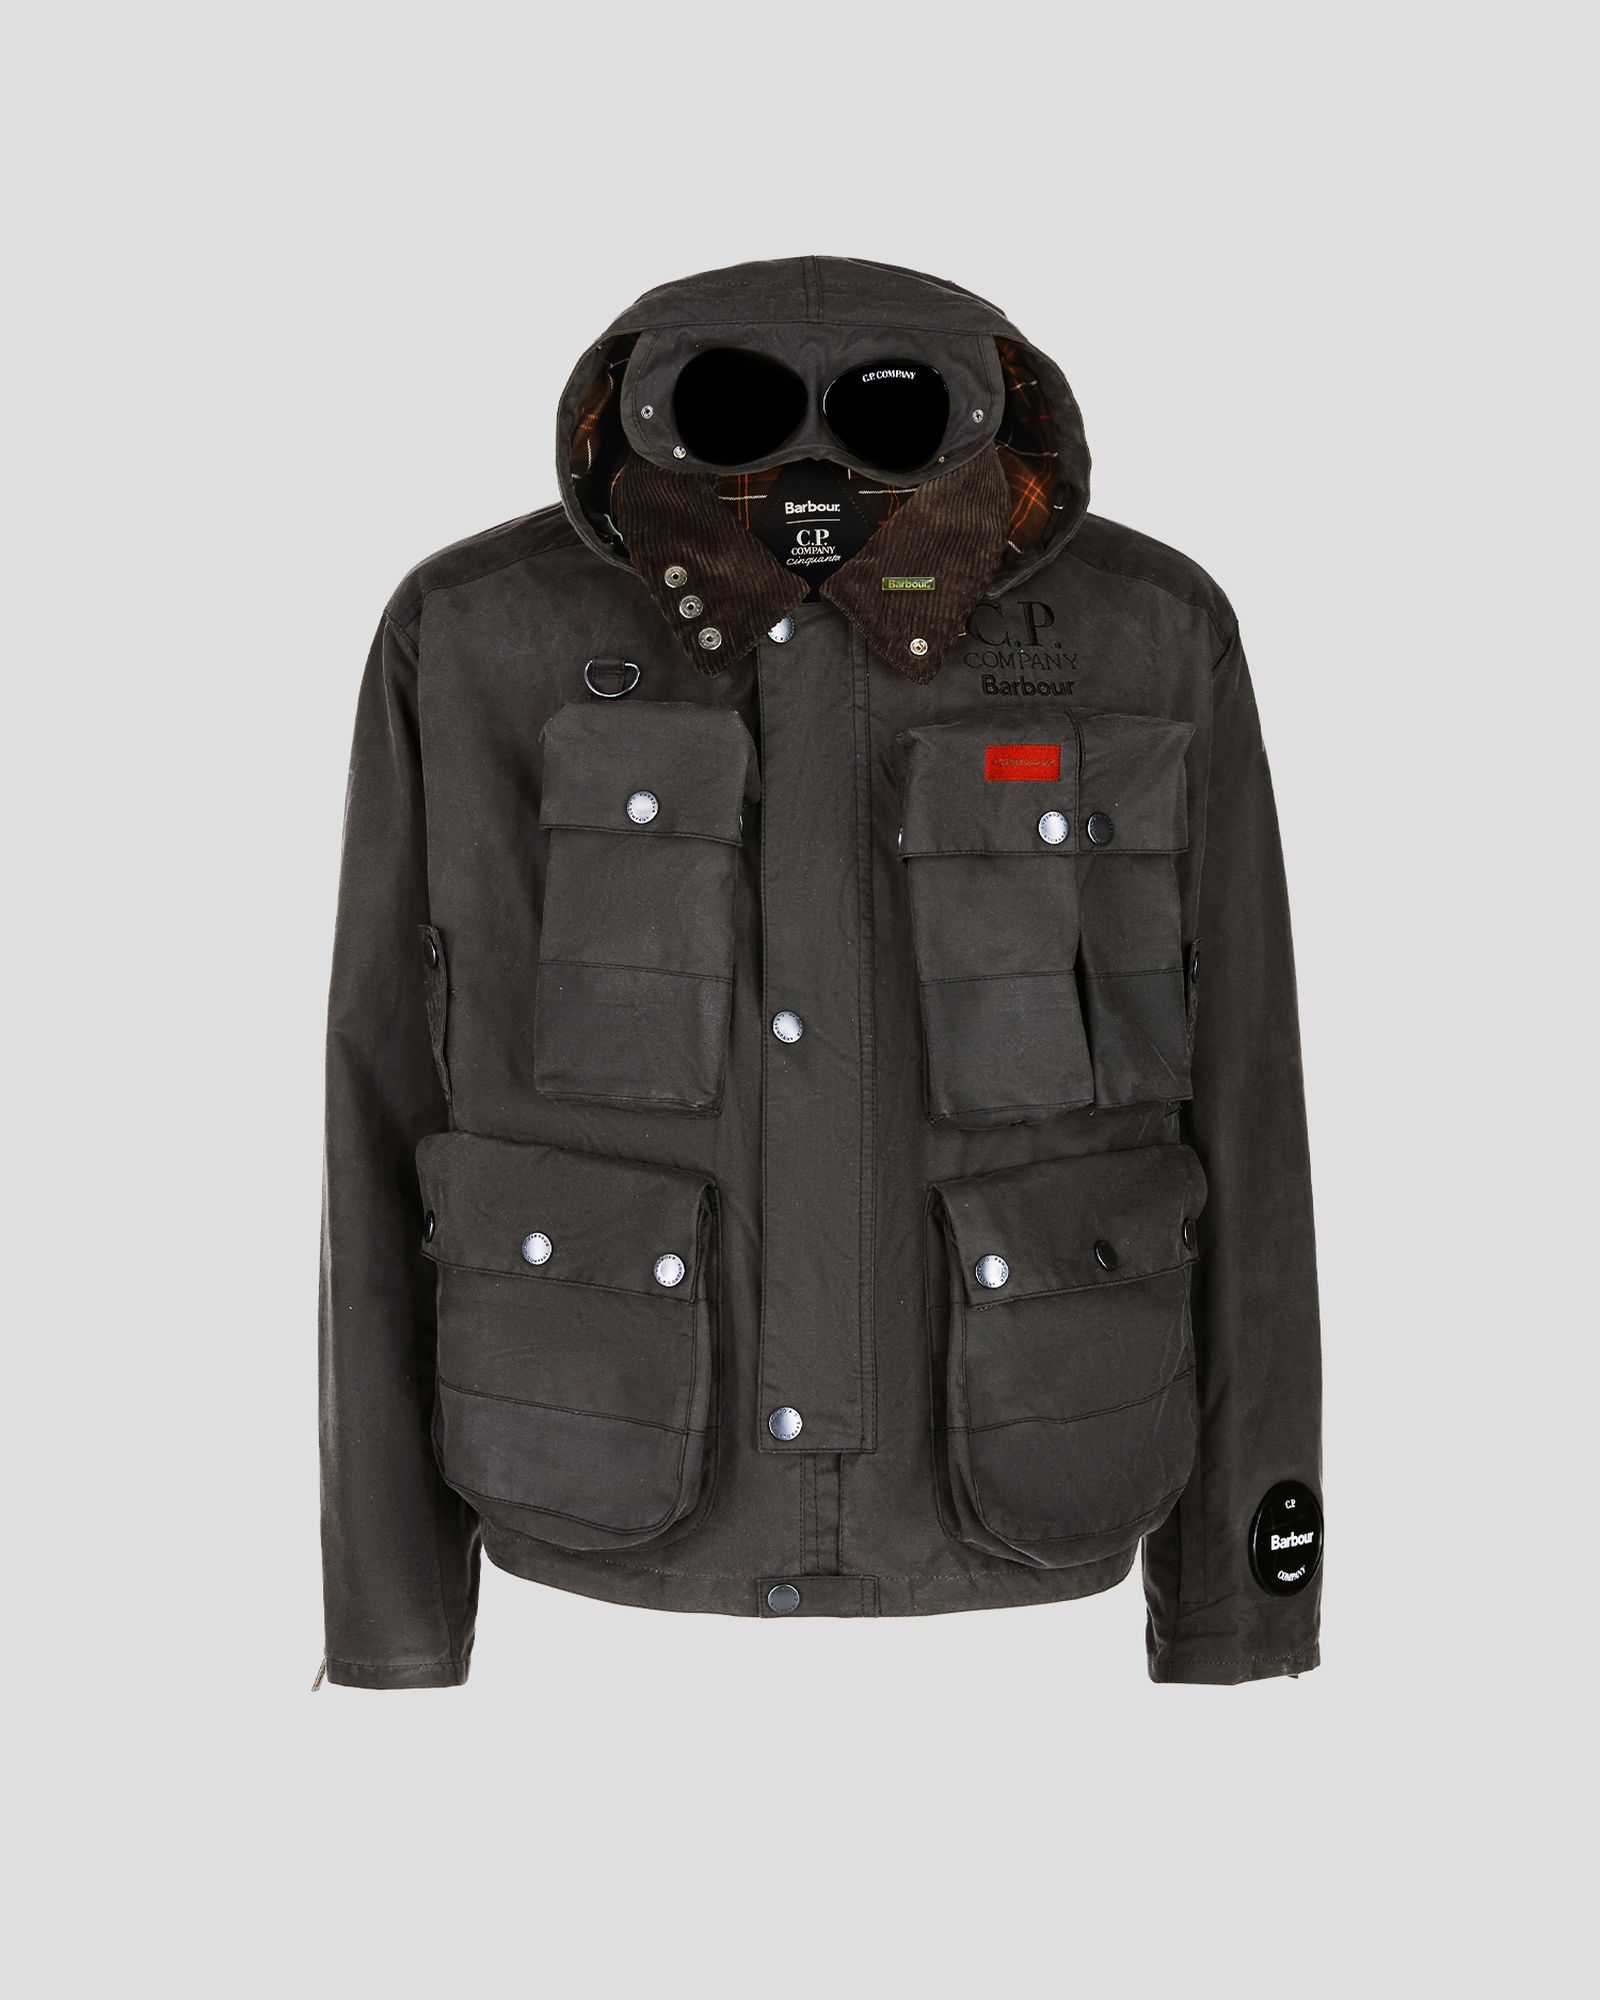 barbour-c-p-company-collection-release-information-1